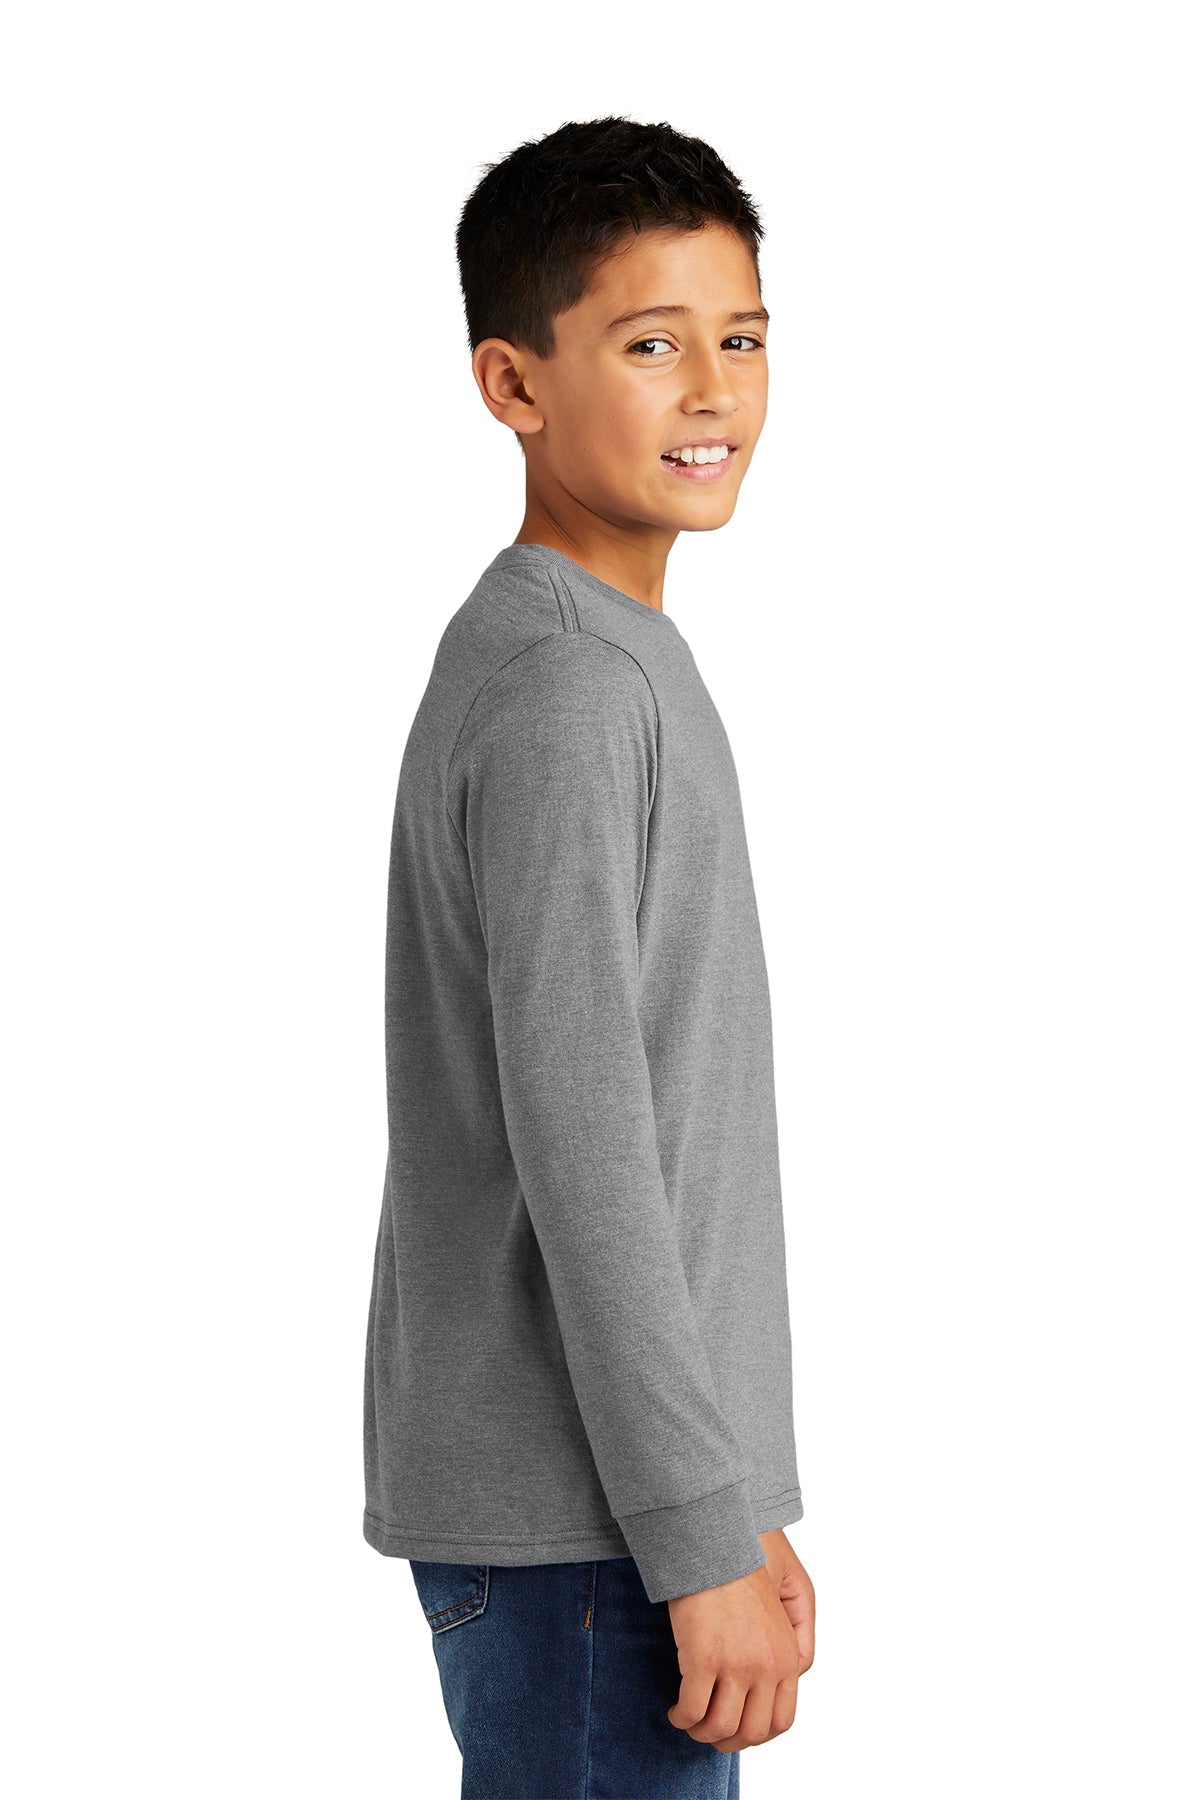 DT132Y District® Youth Perfect Tri® Long Sleeve Tee